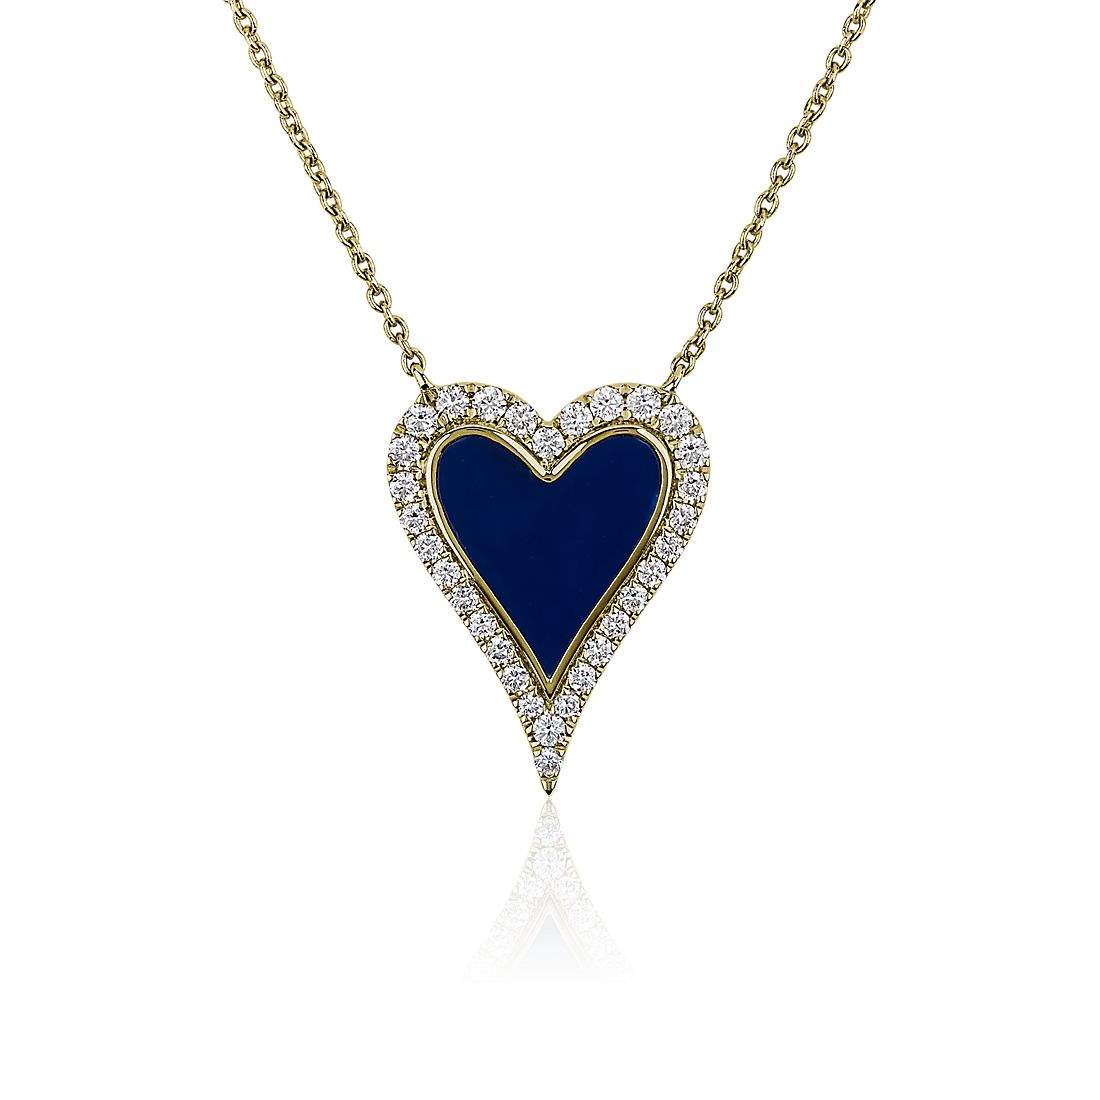 Diamond Heart Pendant with Blue Resin in 14k Yellow Gold (0.24 ct. tw.)